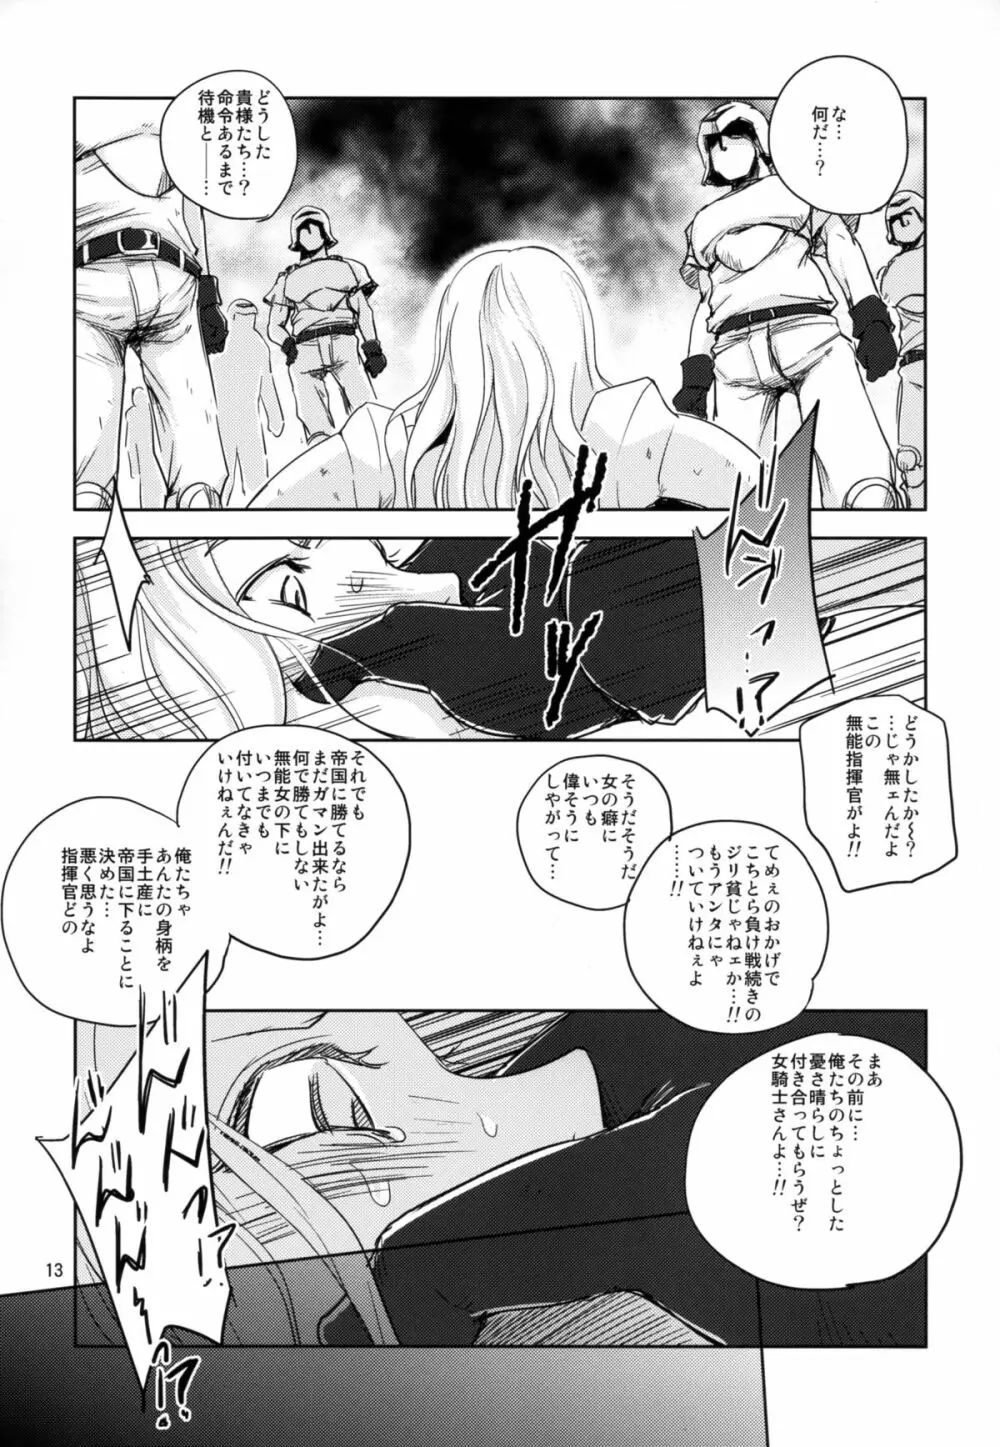 GRASSEN'S WAR ANOTHER STORY Ex #04 ノード侵攻 IV Page.13